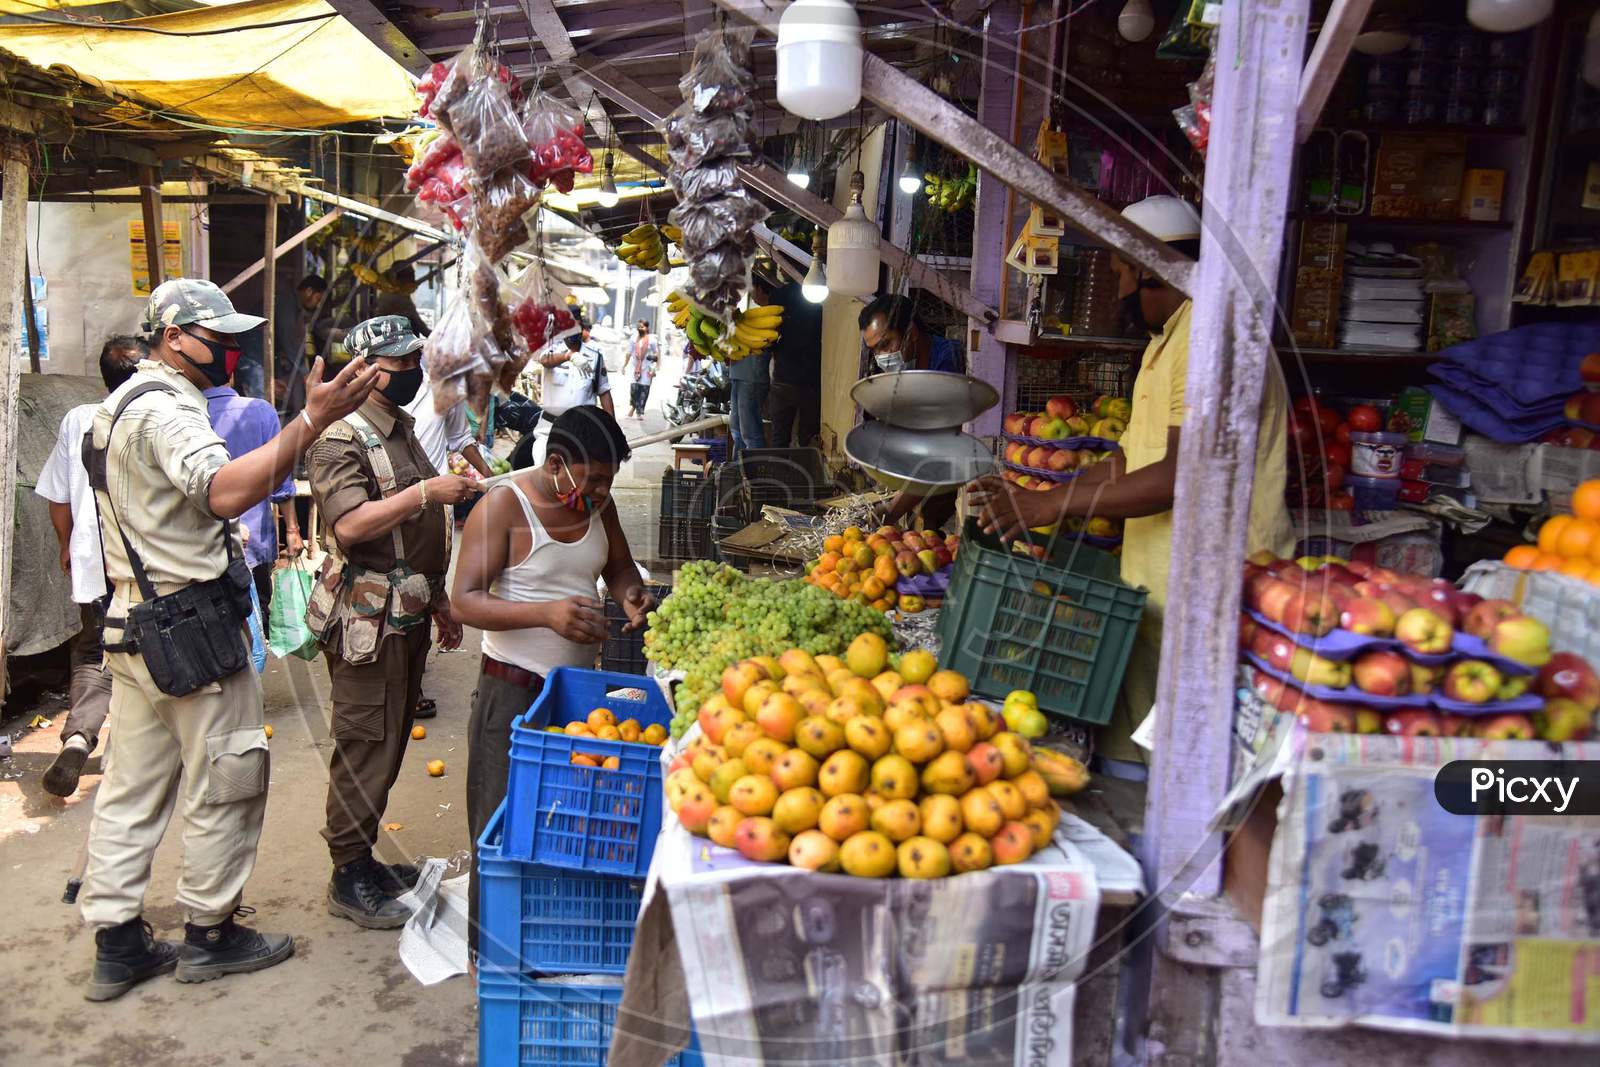 Police Personnel Patrol Through Barbazar Market Asking Vendors To Shut Their Stalls During The Third  Day Of National Lockdown Imposed By Pm Narendra Modi To Curb The Spread Of Coronavirus In Nagaon District Of Assam ,India